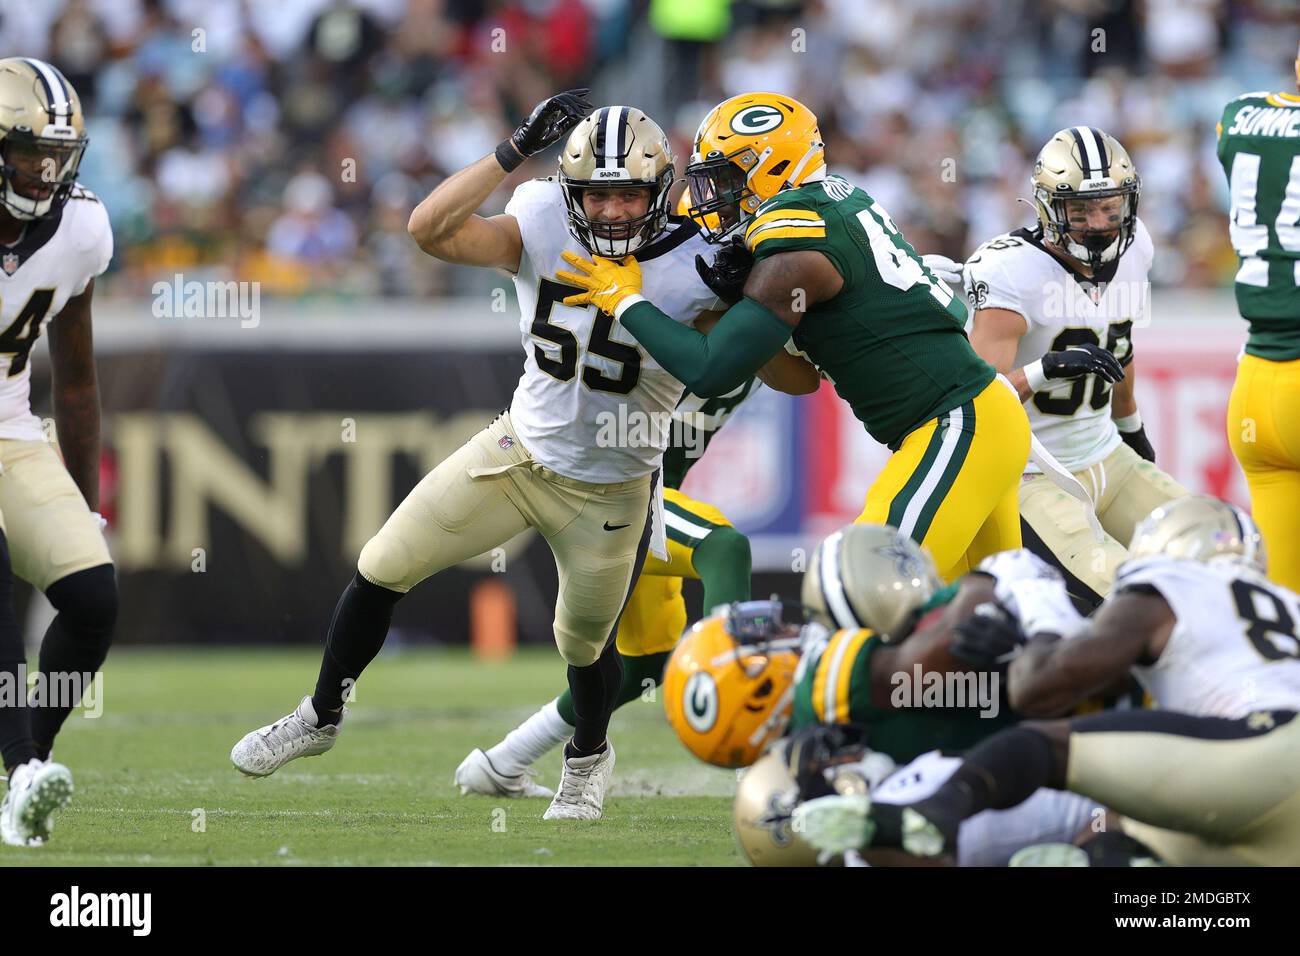 Green Bay Packers vs. New Orleans Saints